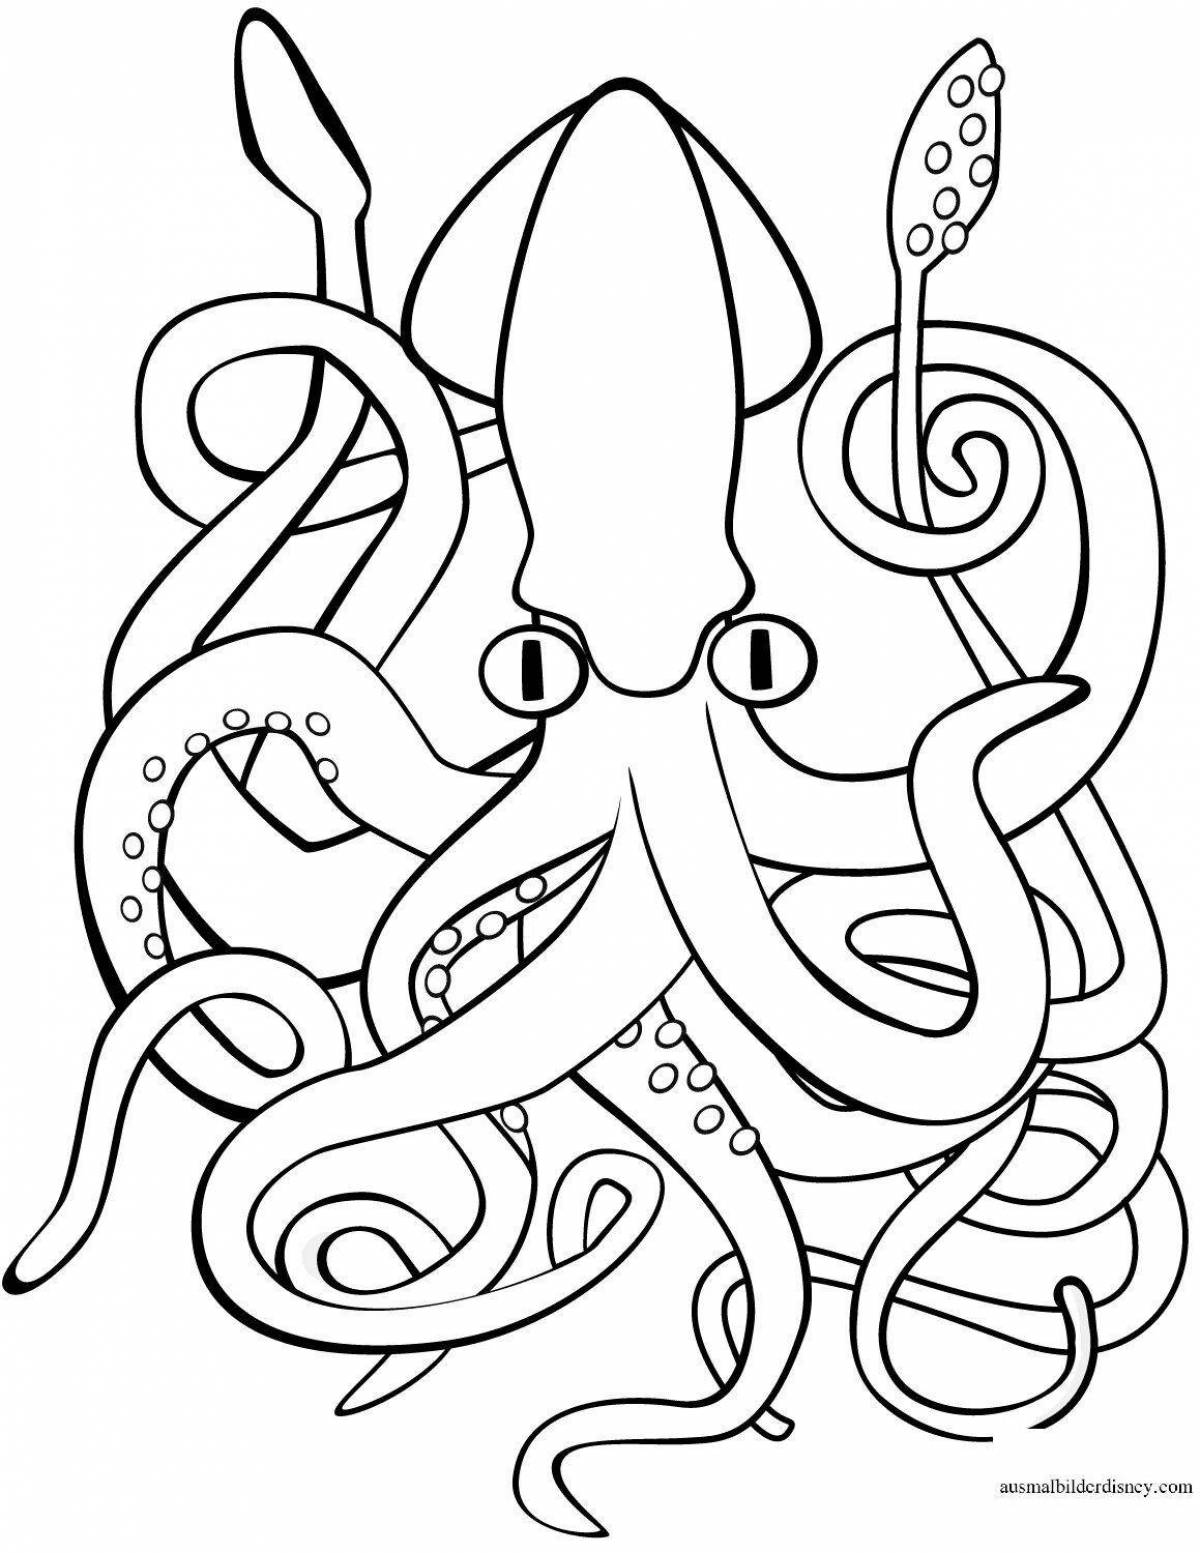 Sweet coloring squid for kids